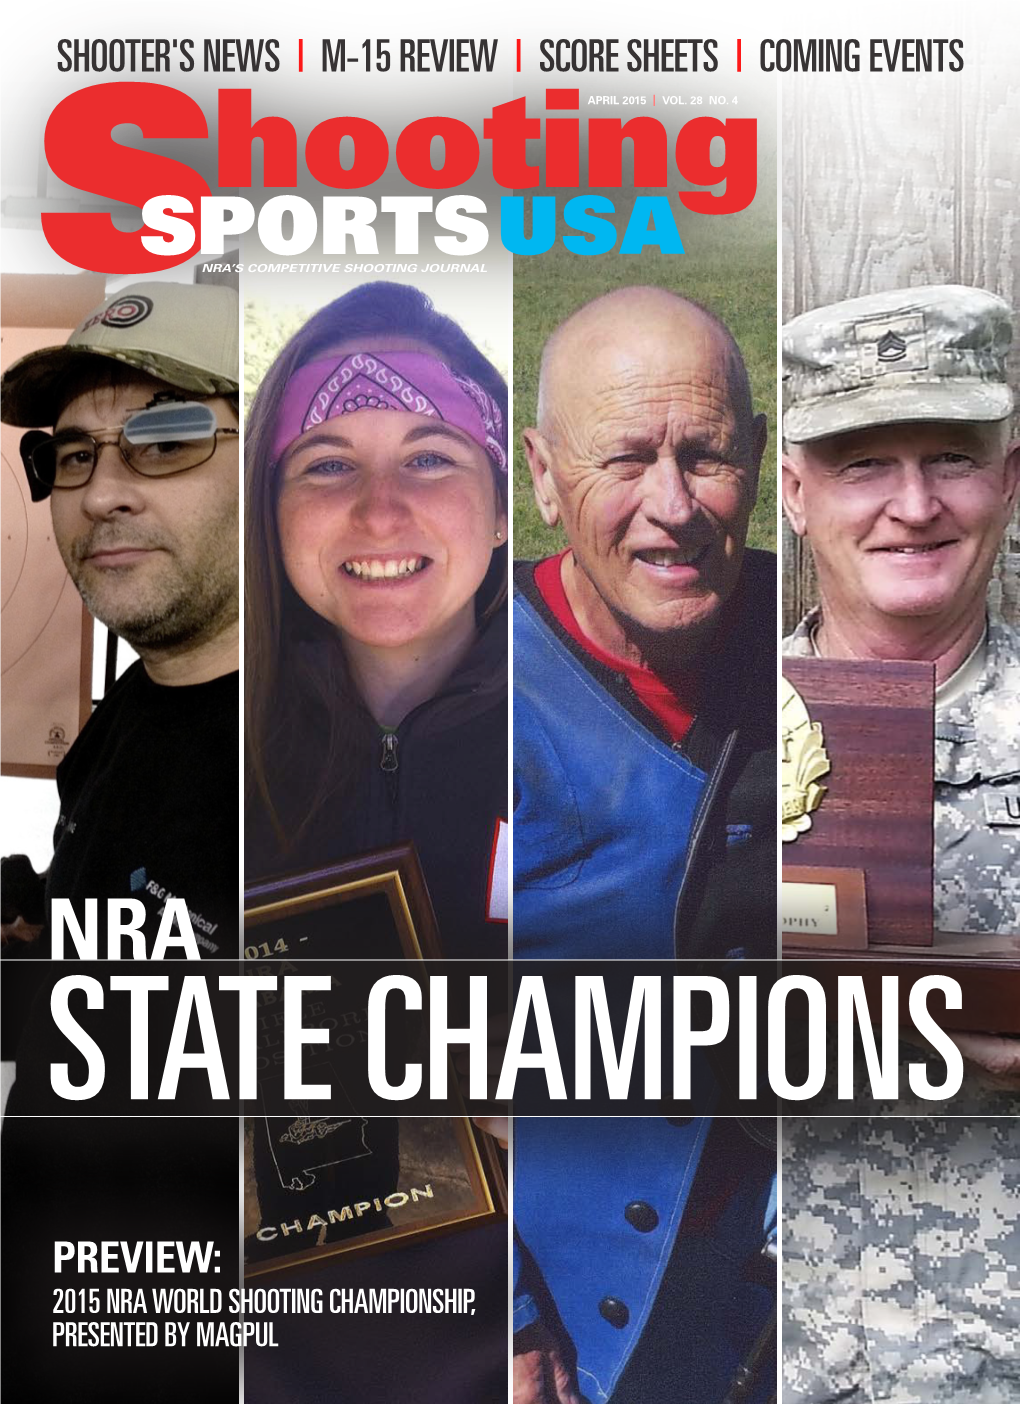 NRA SANCTIONED 2015 NATIONAL RIFLE & PISTOL CHAMPIONSHIPS Camp Perry, OH